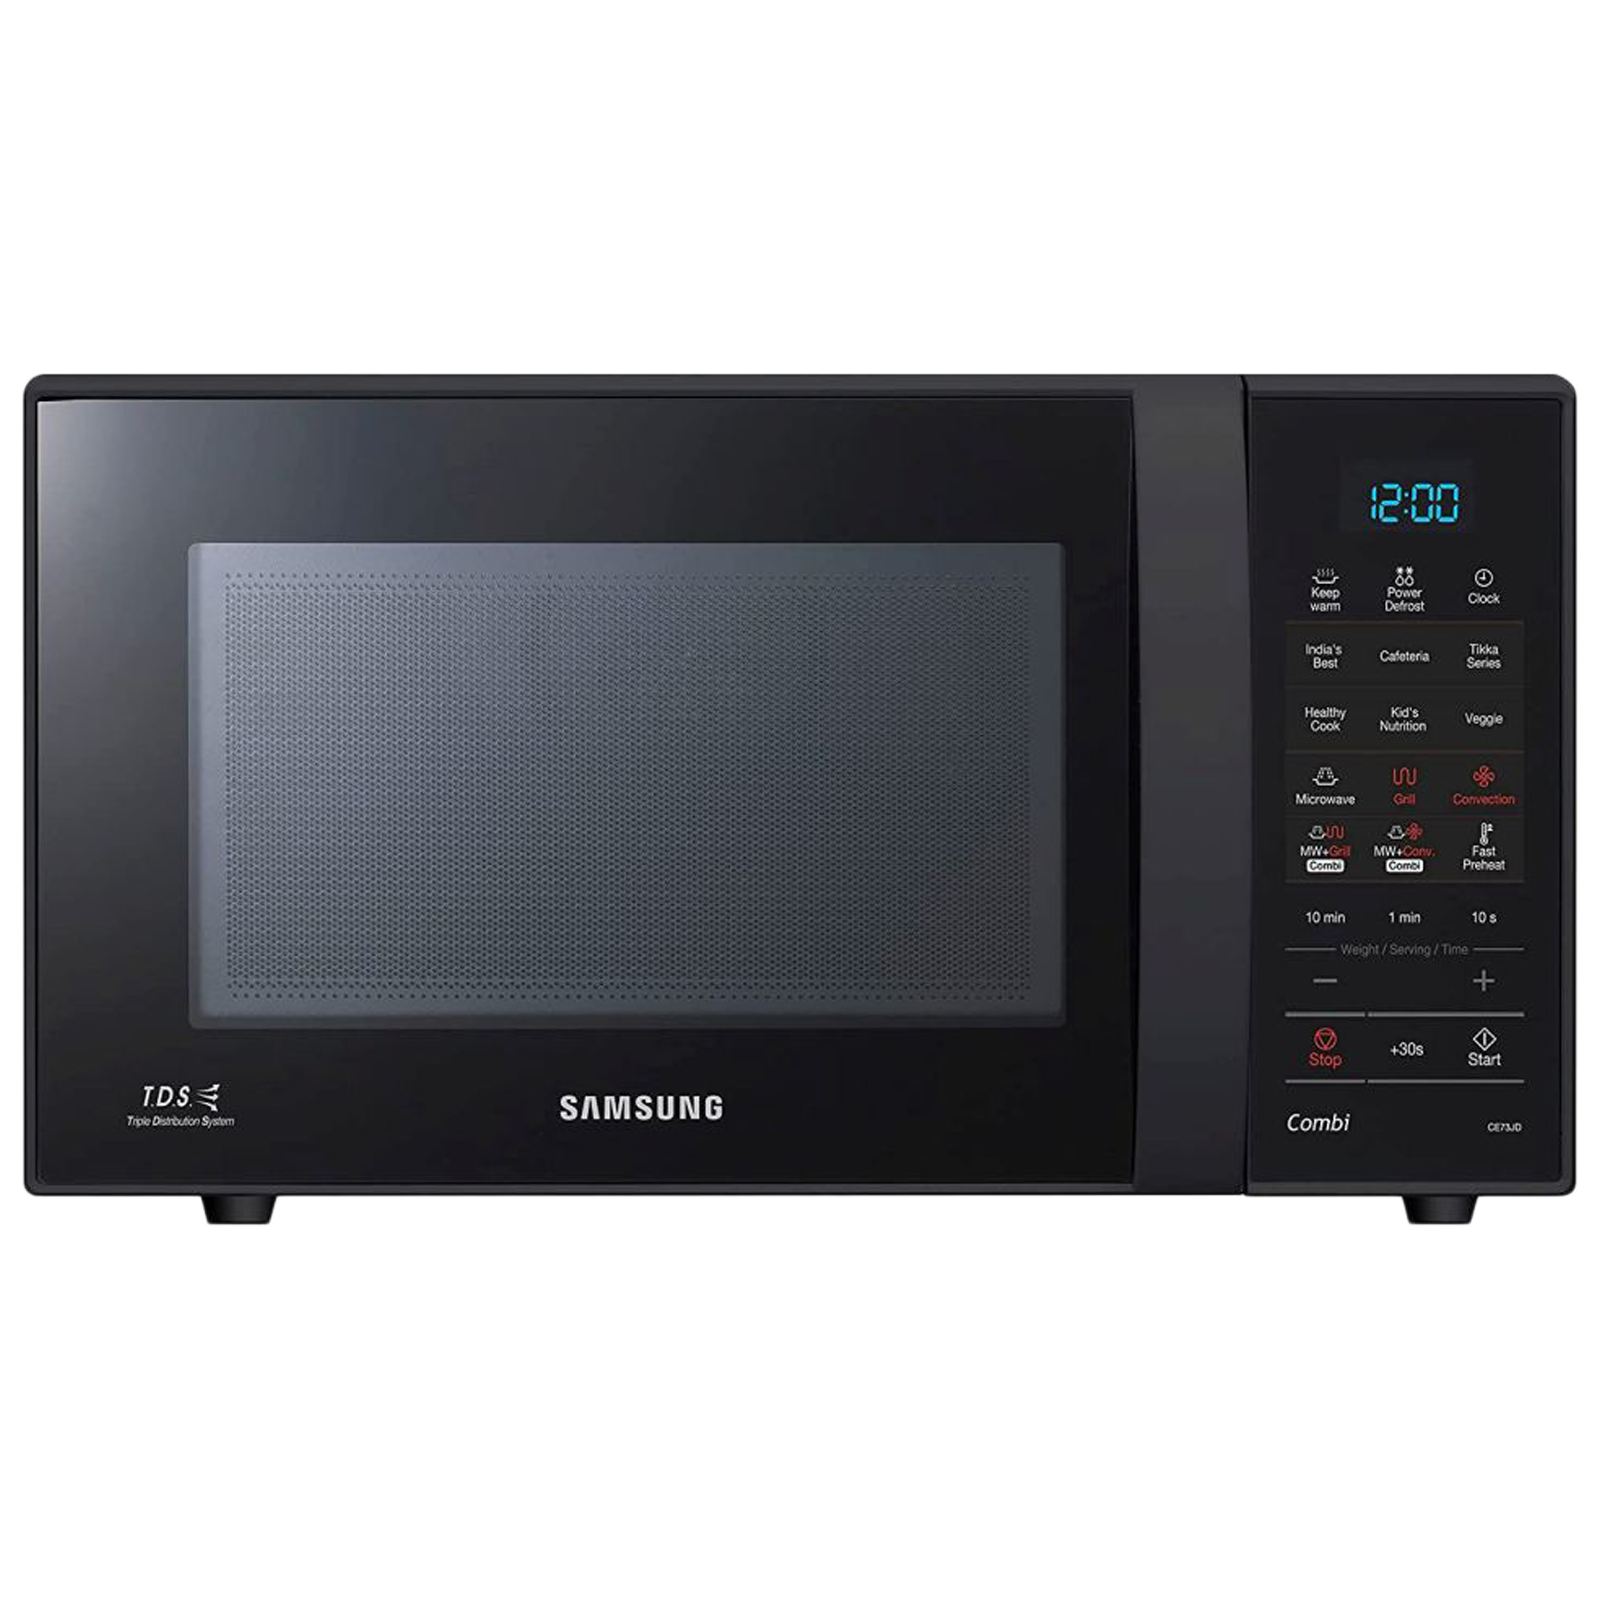 SAMSUNG 21 Litres Convection Microwave Oven (Triple Distribution System with Power Defrost, CE73JD-B1/XTL, Black)_1